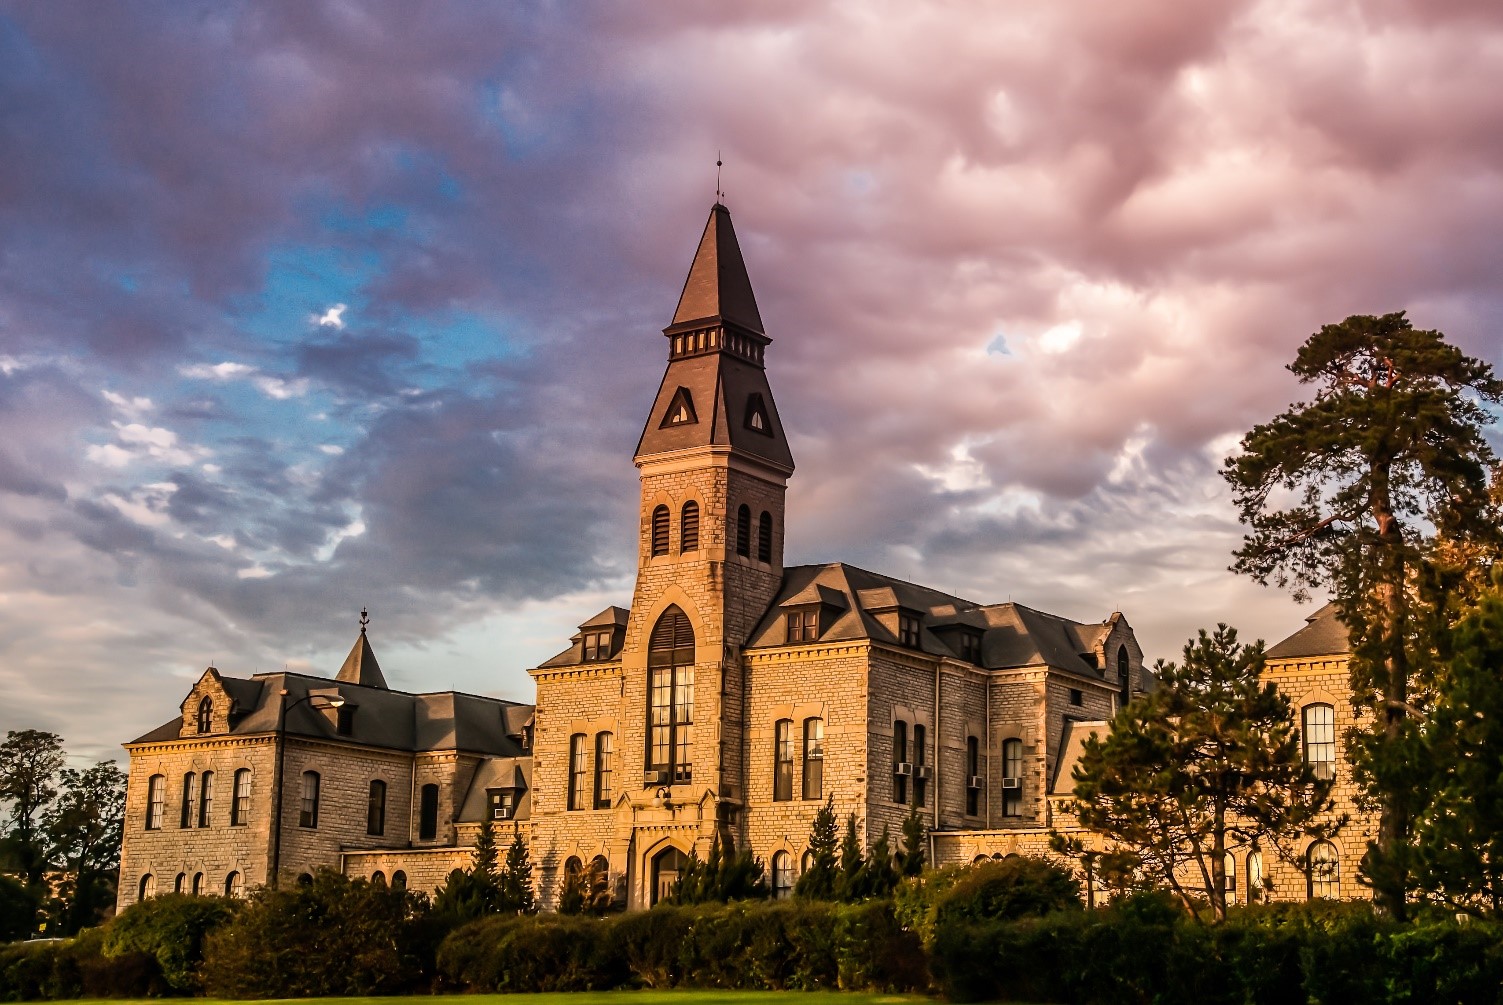 Anderson Hall, K-States administration building, is made of limestone and has a bell tower. A landscape of green bushes and trees frames the building while clouds dot a blue sky behind it.